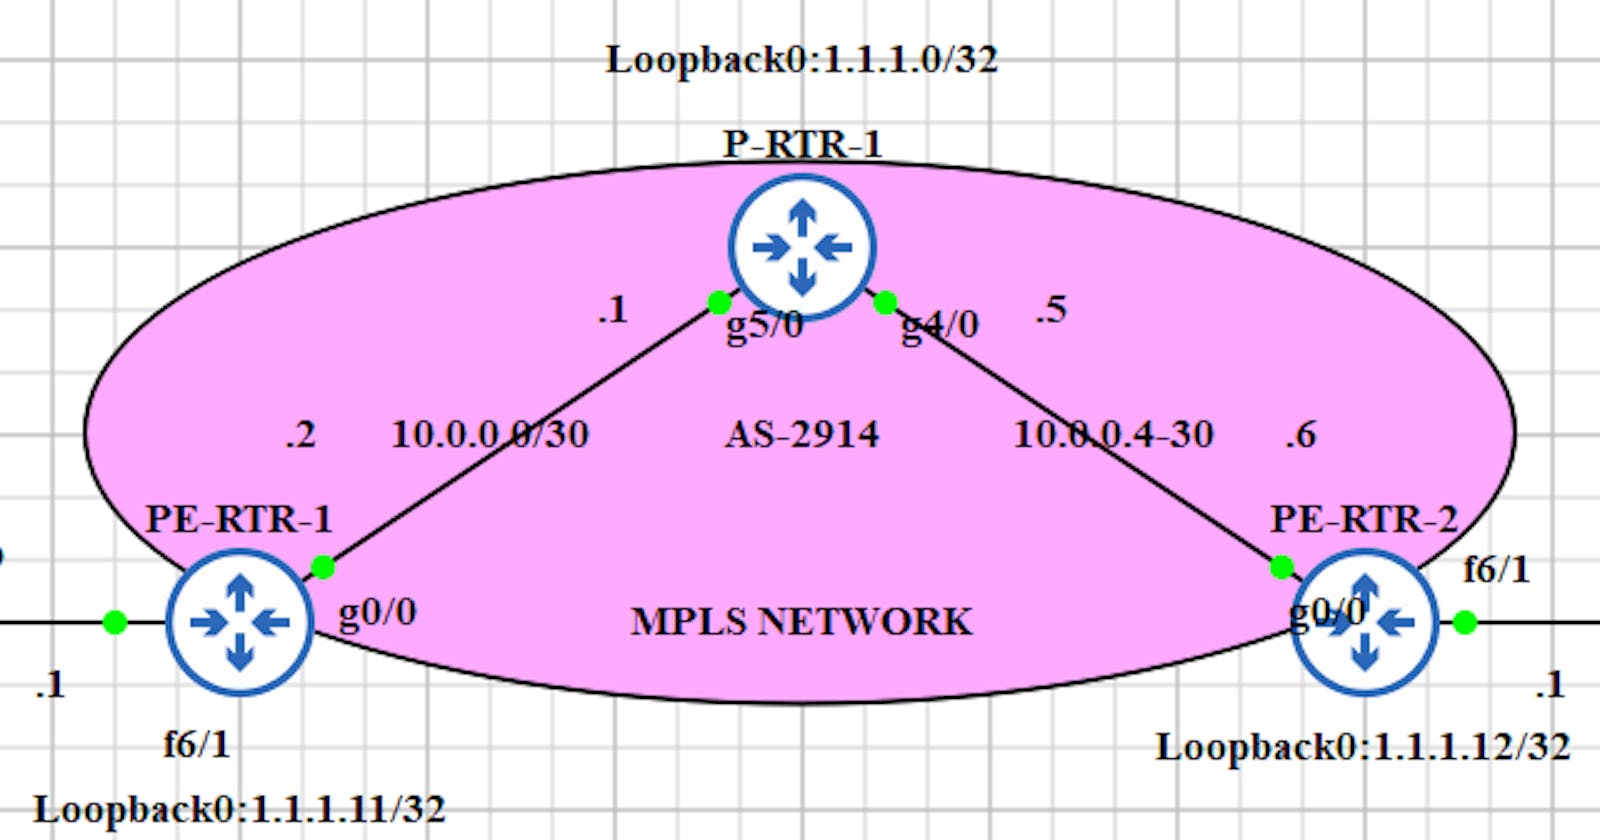 Configuring MPLS L3 VPN on Cisco IOS using GNS3